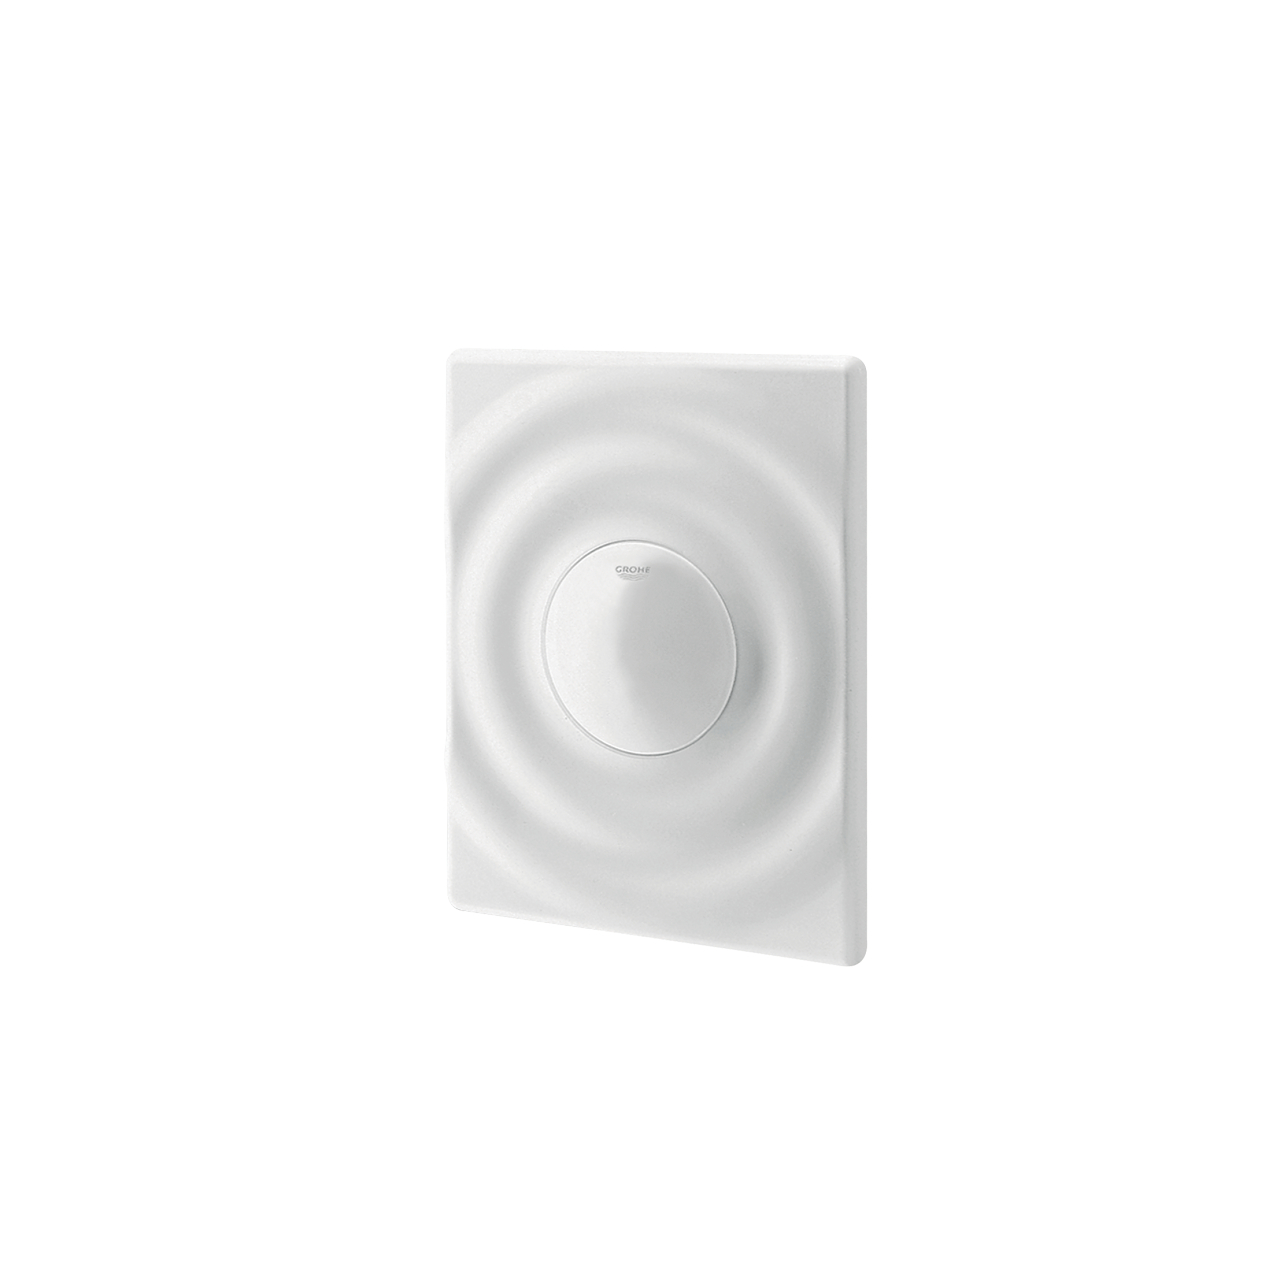 GROHE SURF WALL PLATE WHITE